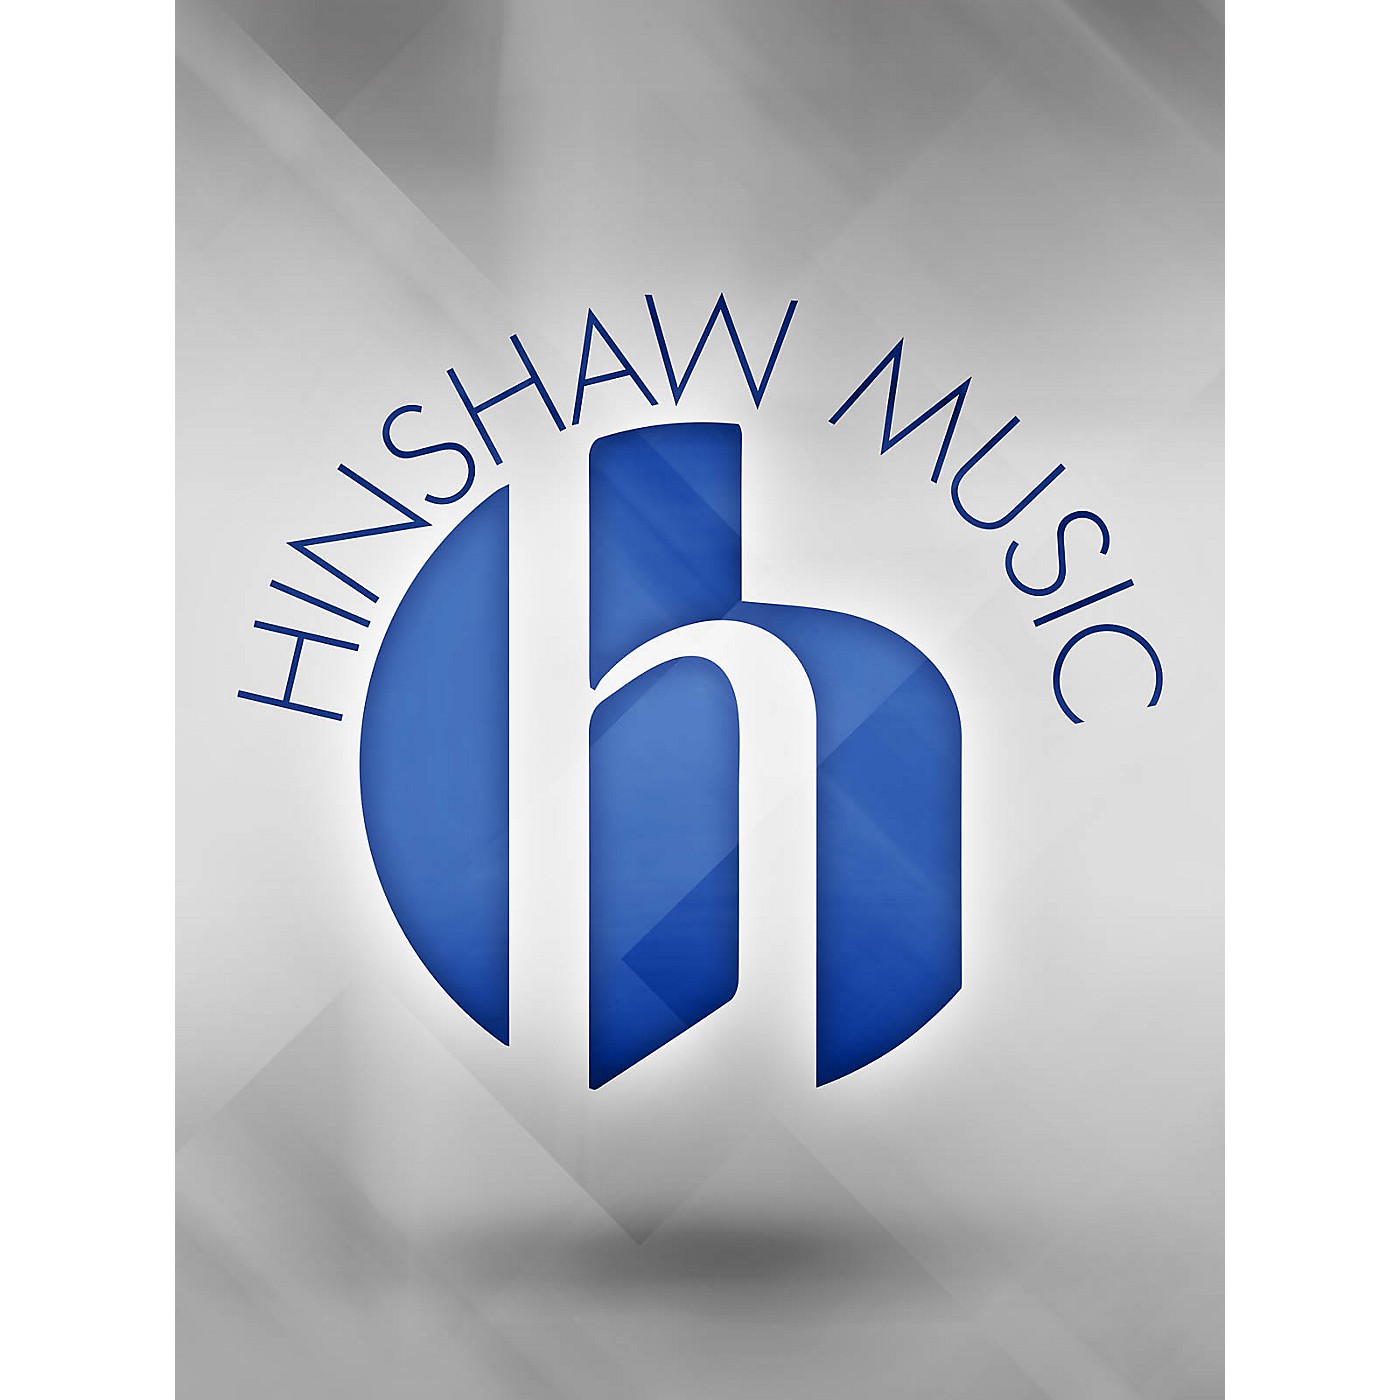 Hinshaw Music This Is the Day SATB Composed by Hank Beebe thumbnail